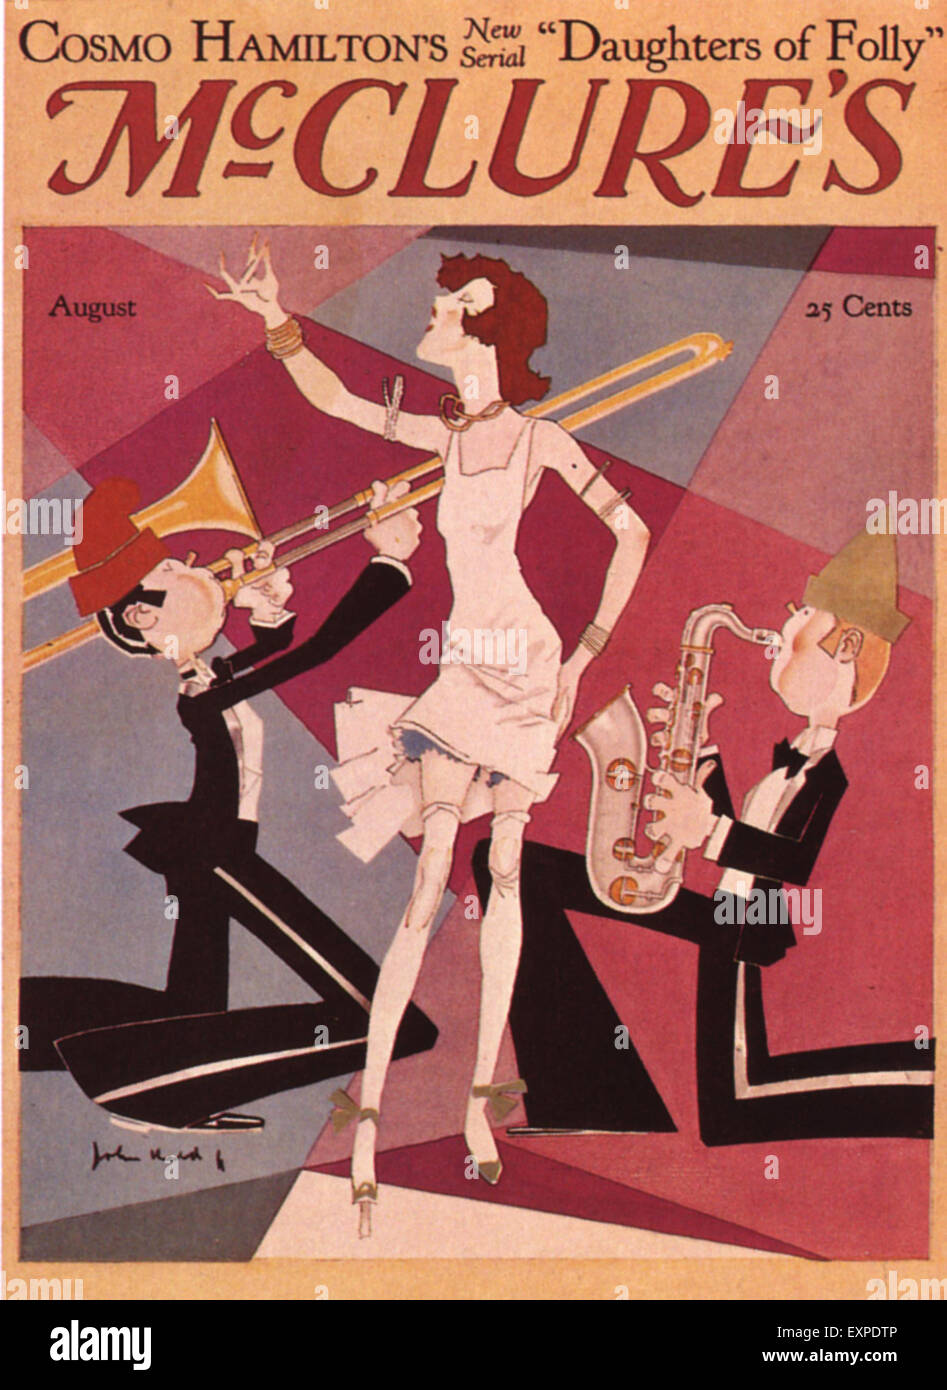 Cover art from the May 1933 edition of Etude magazine featuring two girls  at the piano excited to play scores from the latest edition of the  magazine.